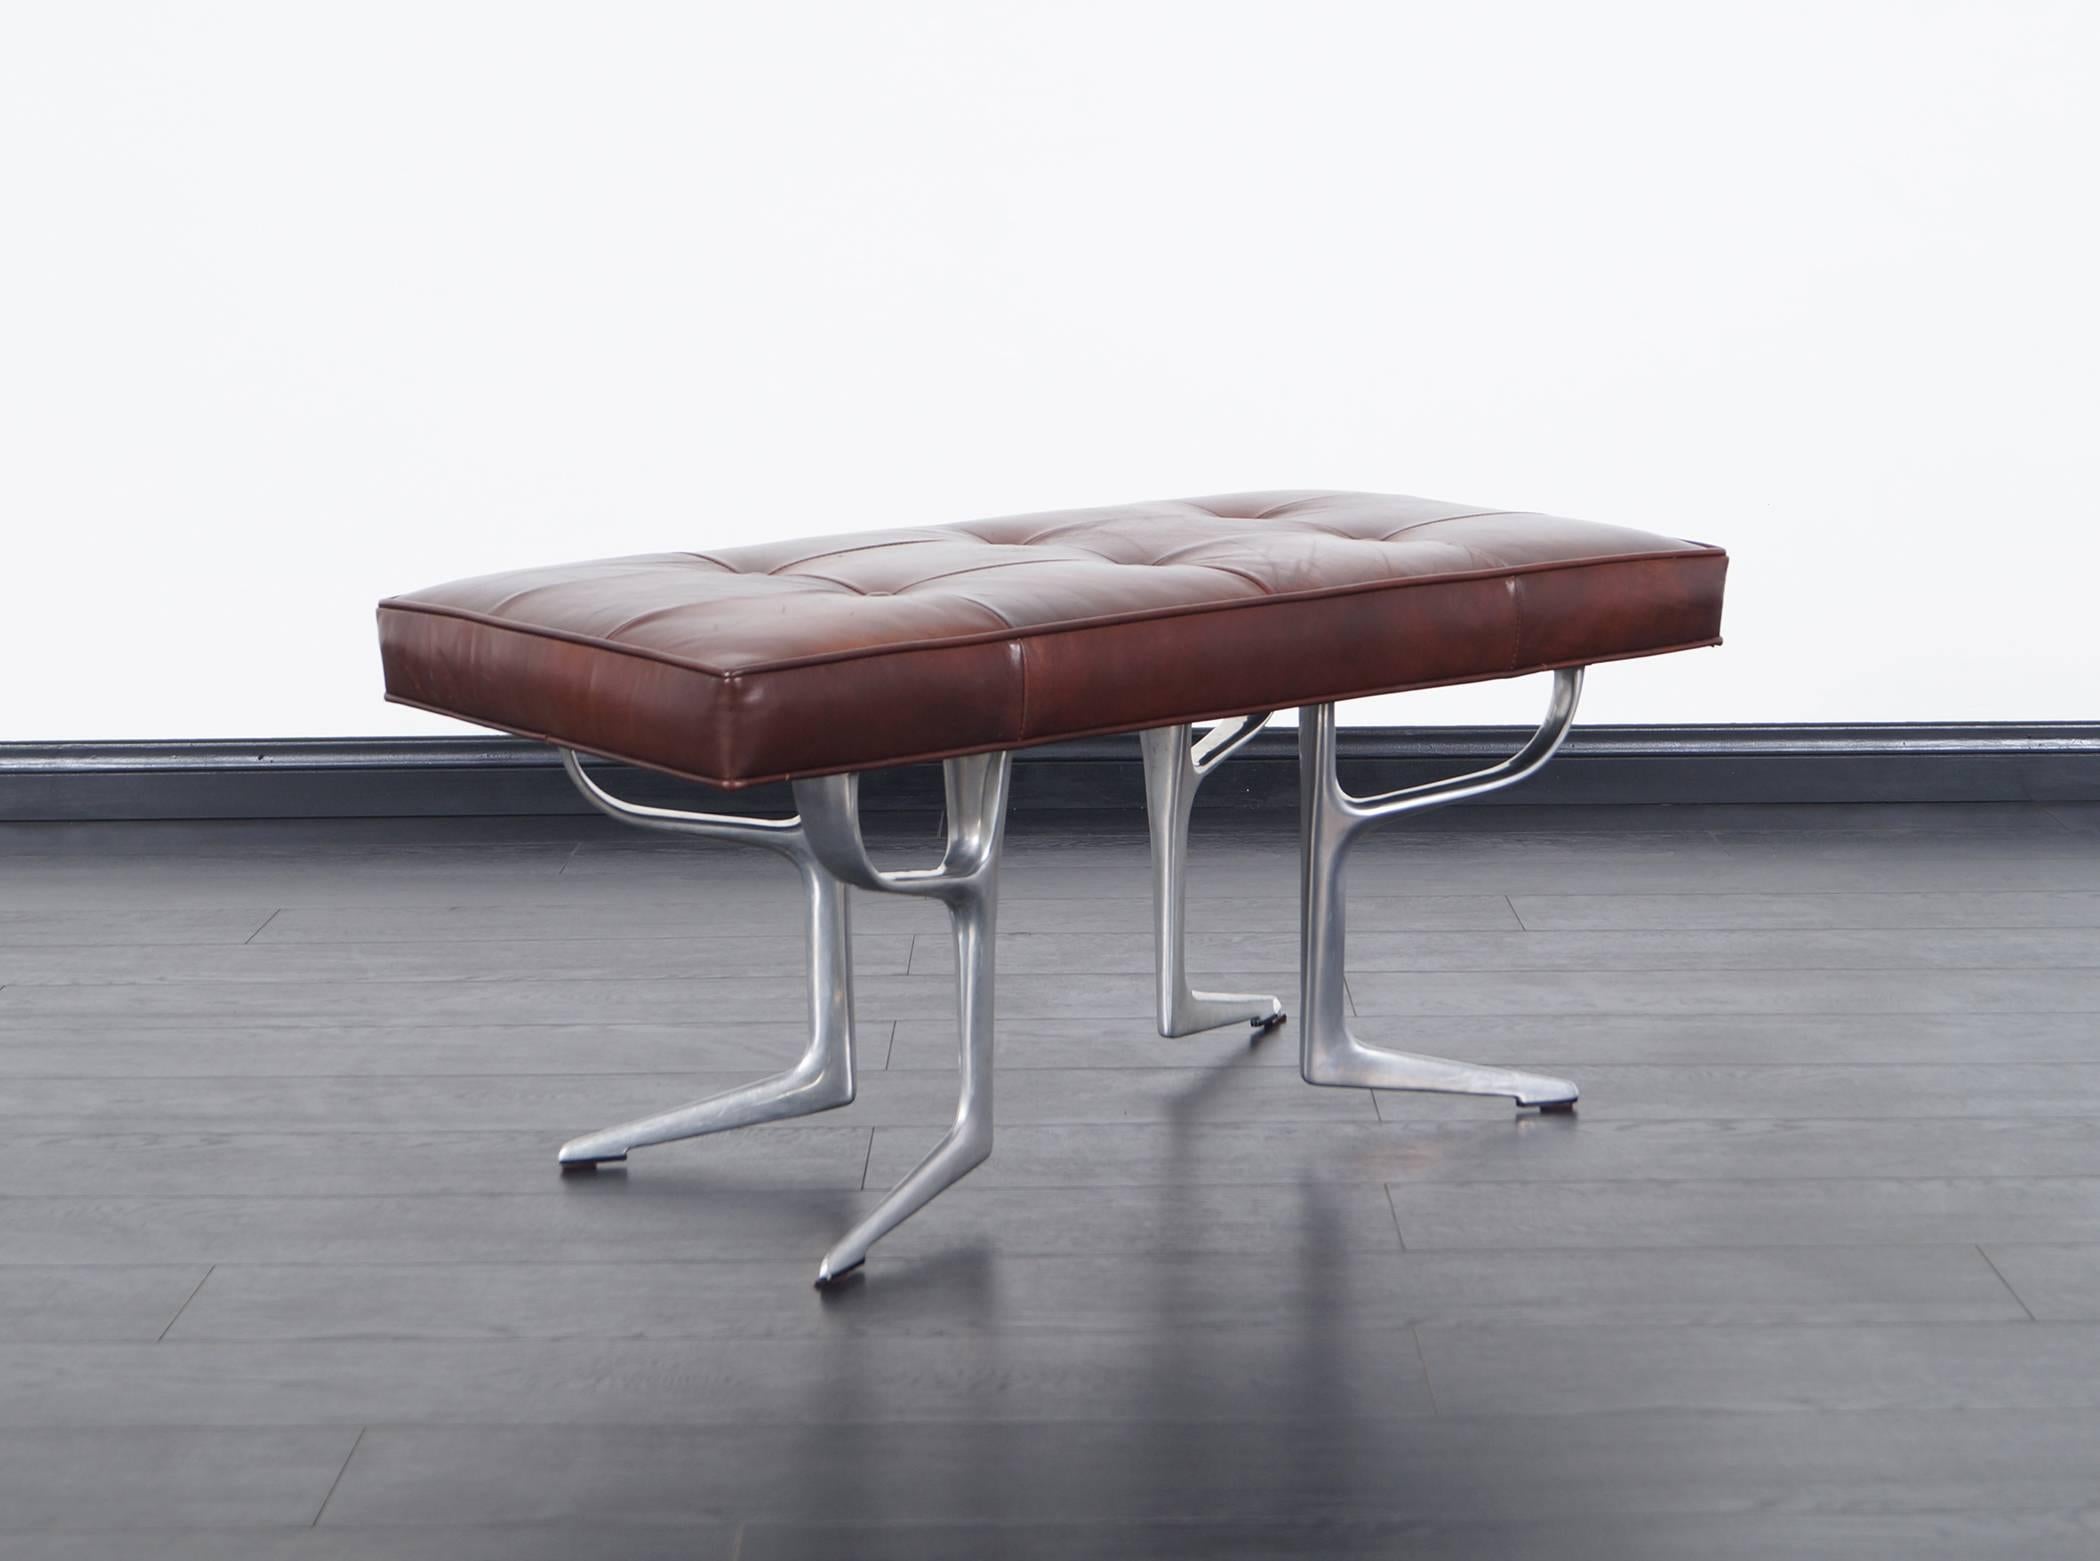 Stunning sculptural aluminum and leather bench in the style of Vladimir Kagan.